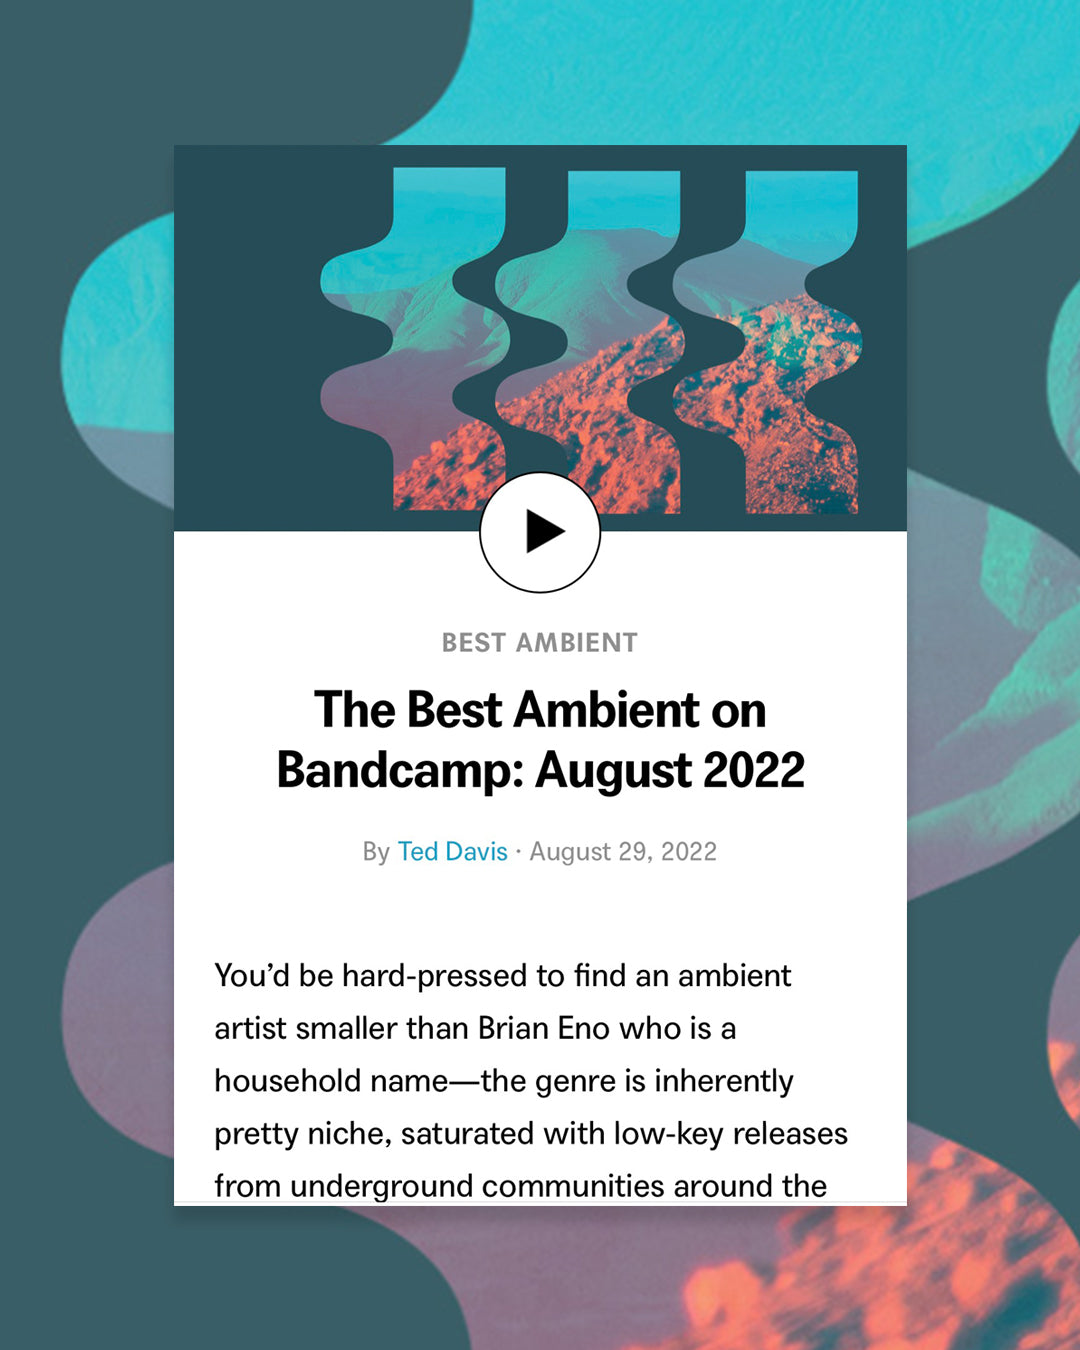 Arthur King Included in Best Ambient on Bandcamp: August 2022